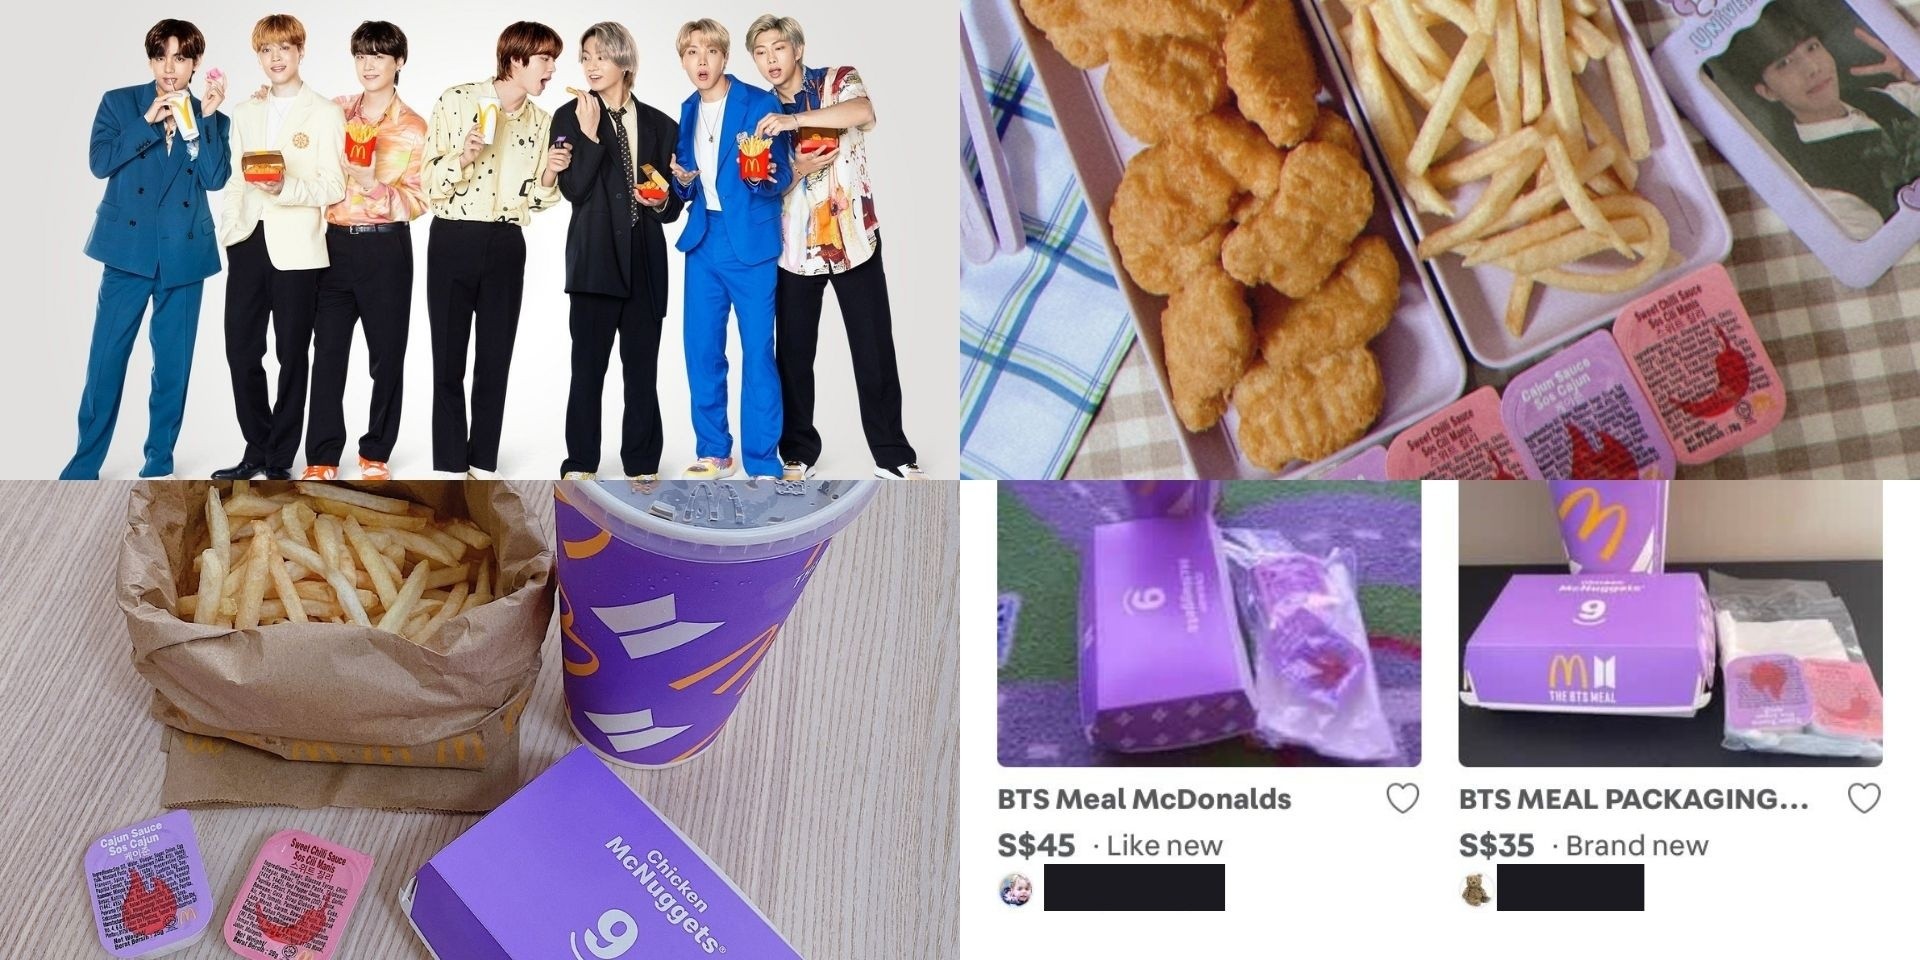 The BTS meal launches in Singapore: ARMY recount their experiences, scalpers resell packaging online